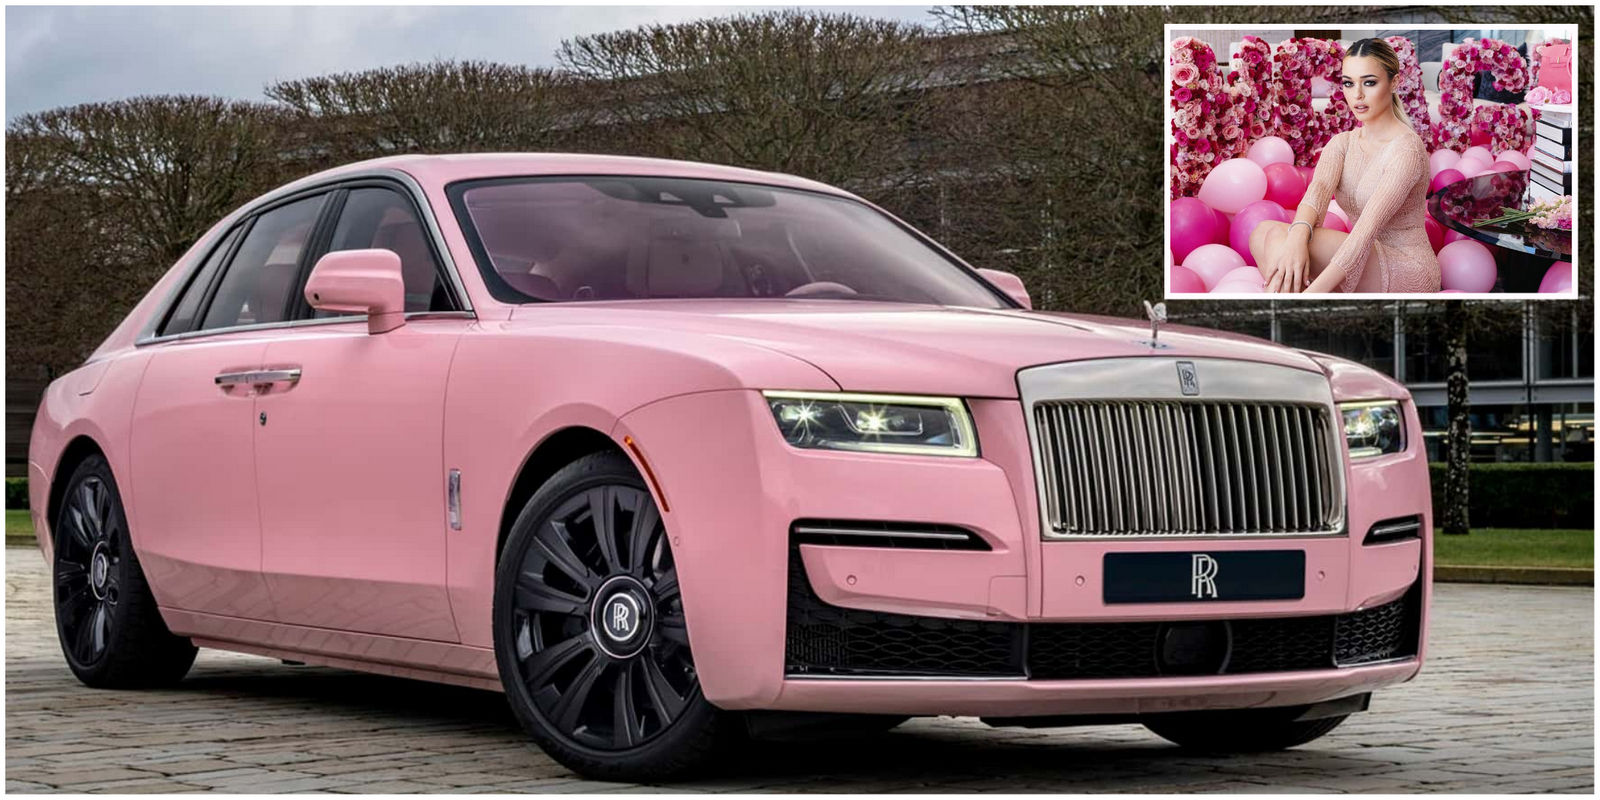 Because a $400,000 Rolls Royce Ghost was too ordinary - This glamorous  influencer got Rolls Royce to create a one-off paint to match her  personality and then craft a bespoke car using